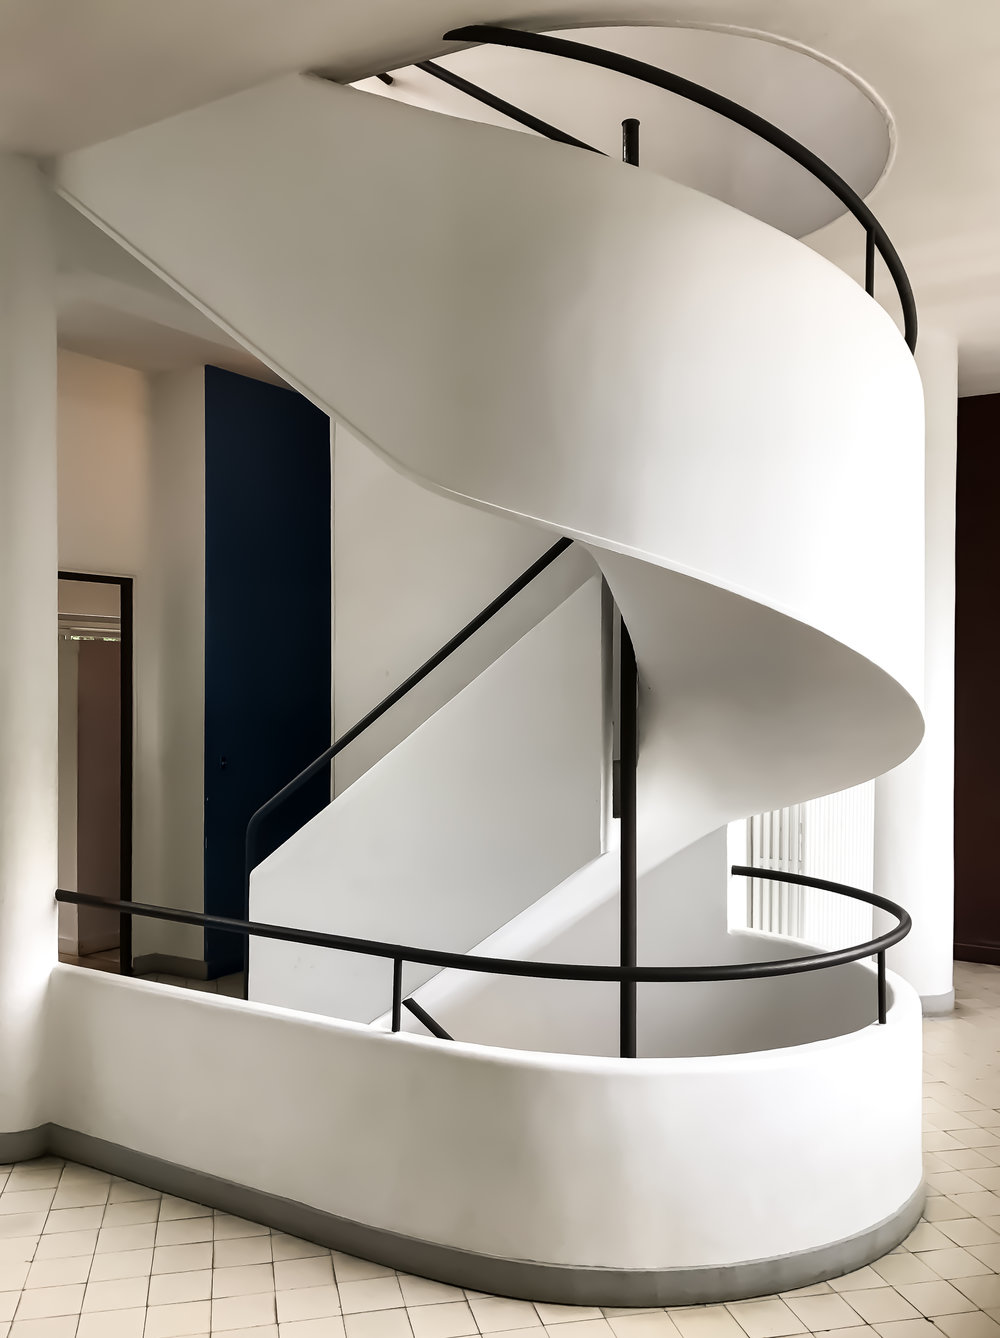 Enclosed spiral staircase